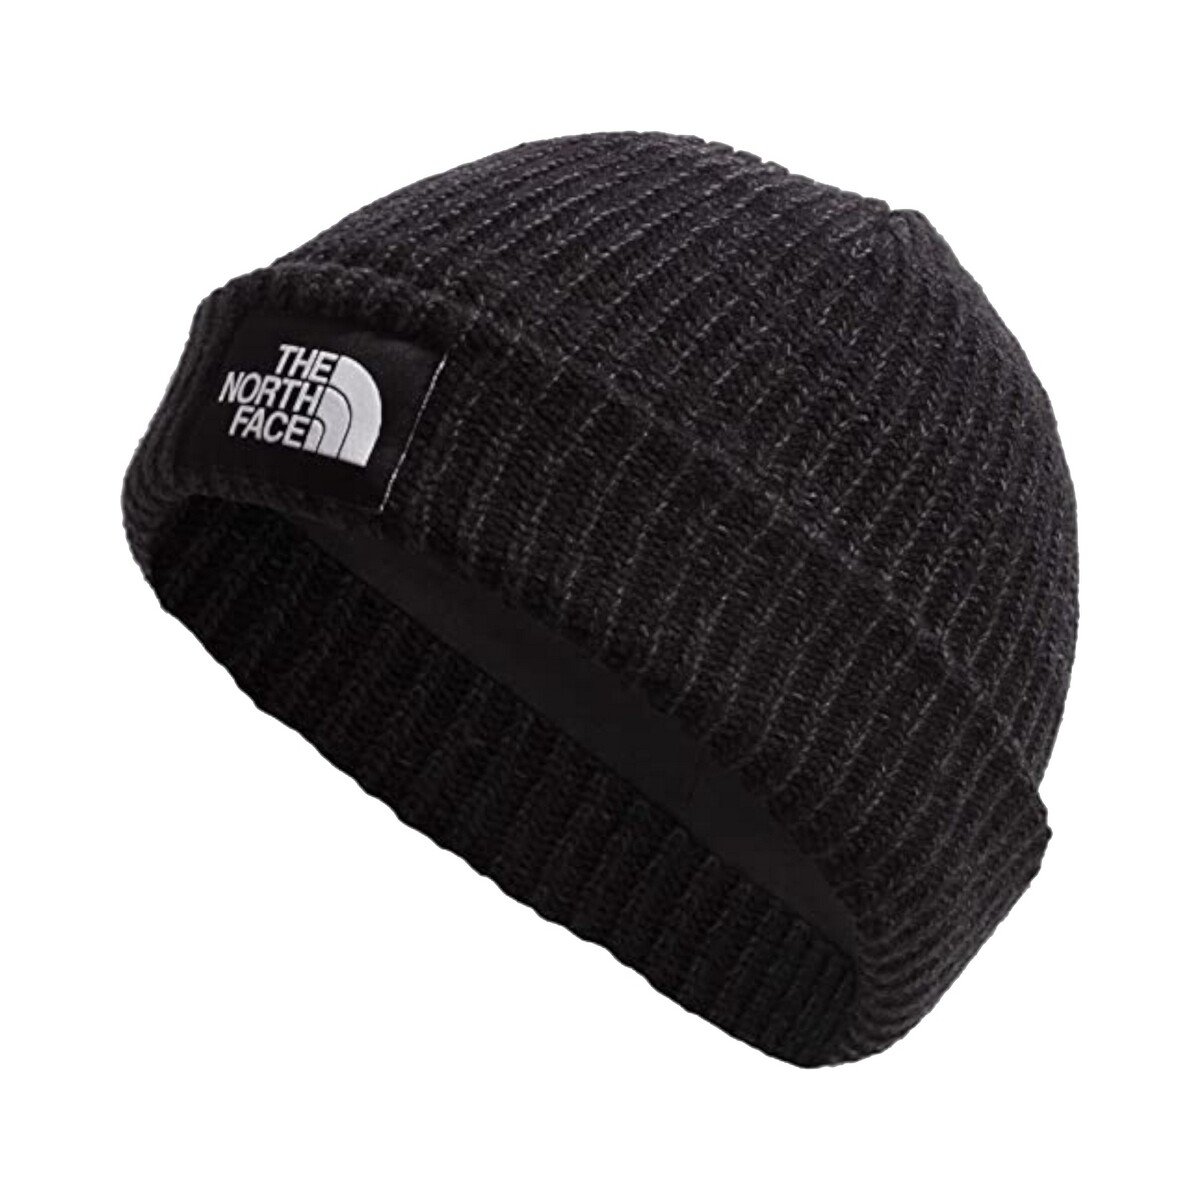 Accessoires Hüte The North Face NF0A3FJW Schwarz